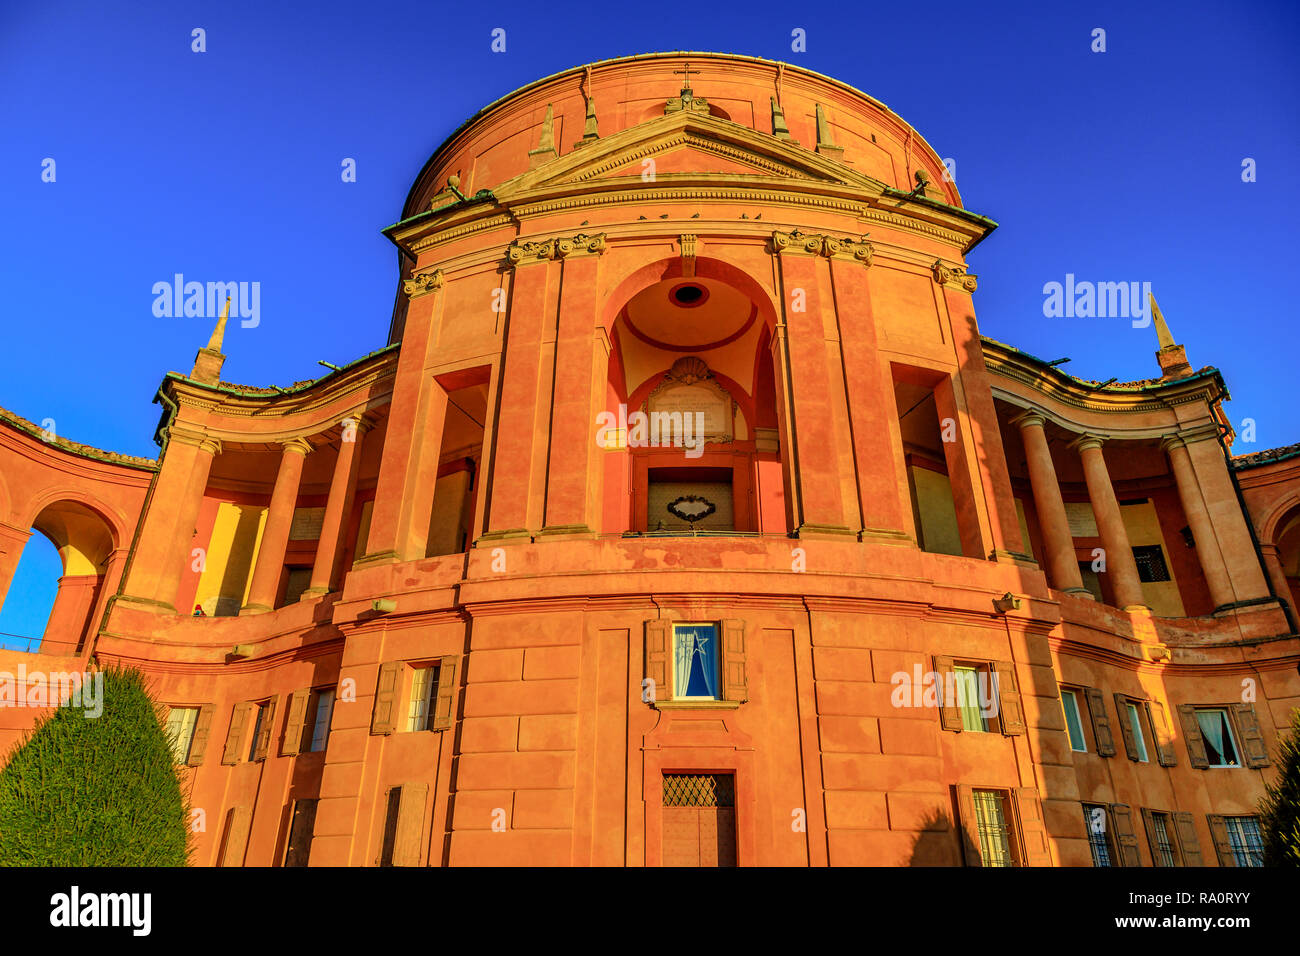 Facade of San Luca Holy Mary Sanctuary of Bologna at sunset light. The Catholic cathedral of San Luca is located on the hills of Bologna city. Sunny with blue sky. Stock Photo